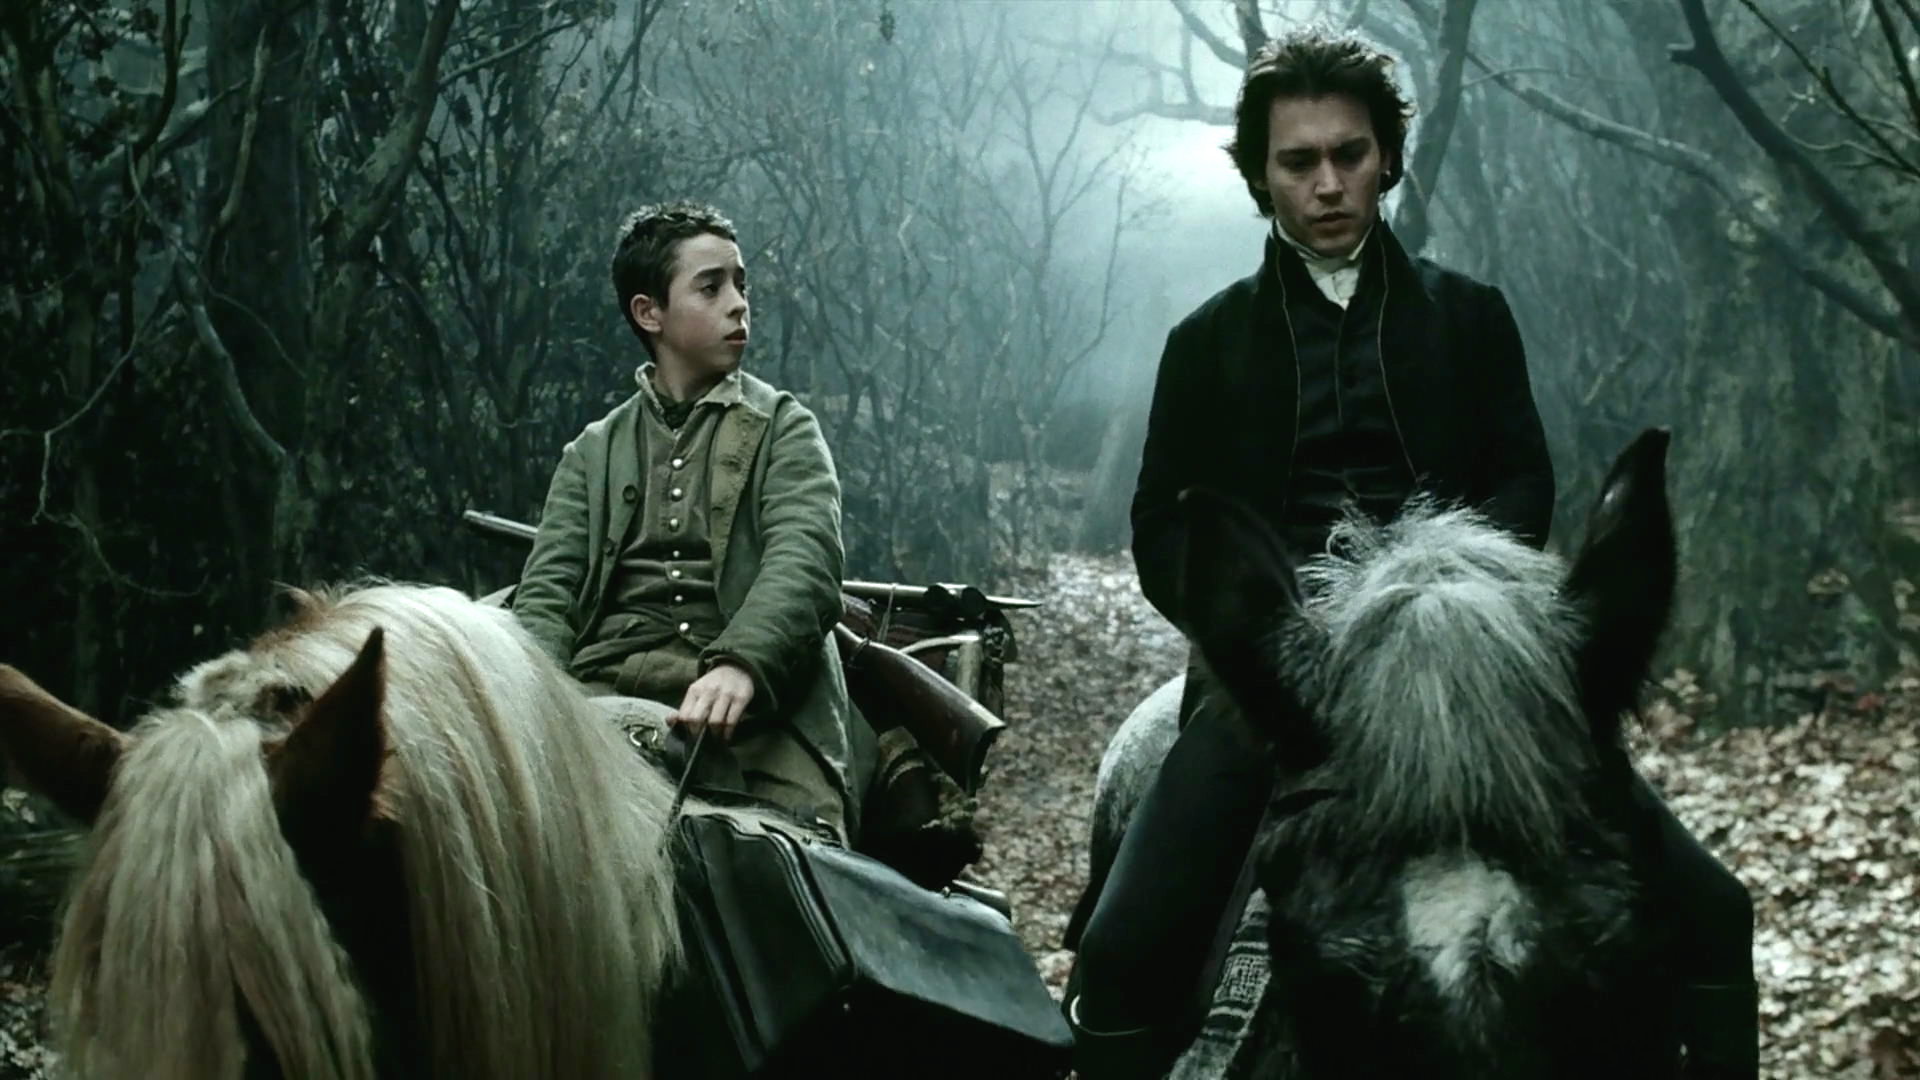 Young Masbeth and Ichabod Crane riding their horses